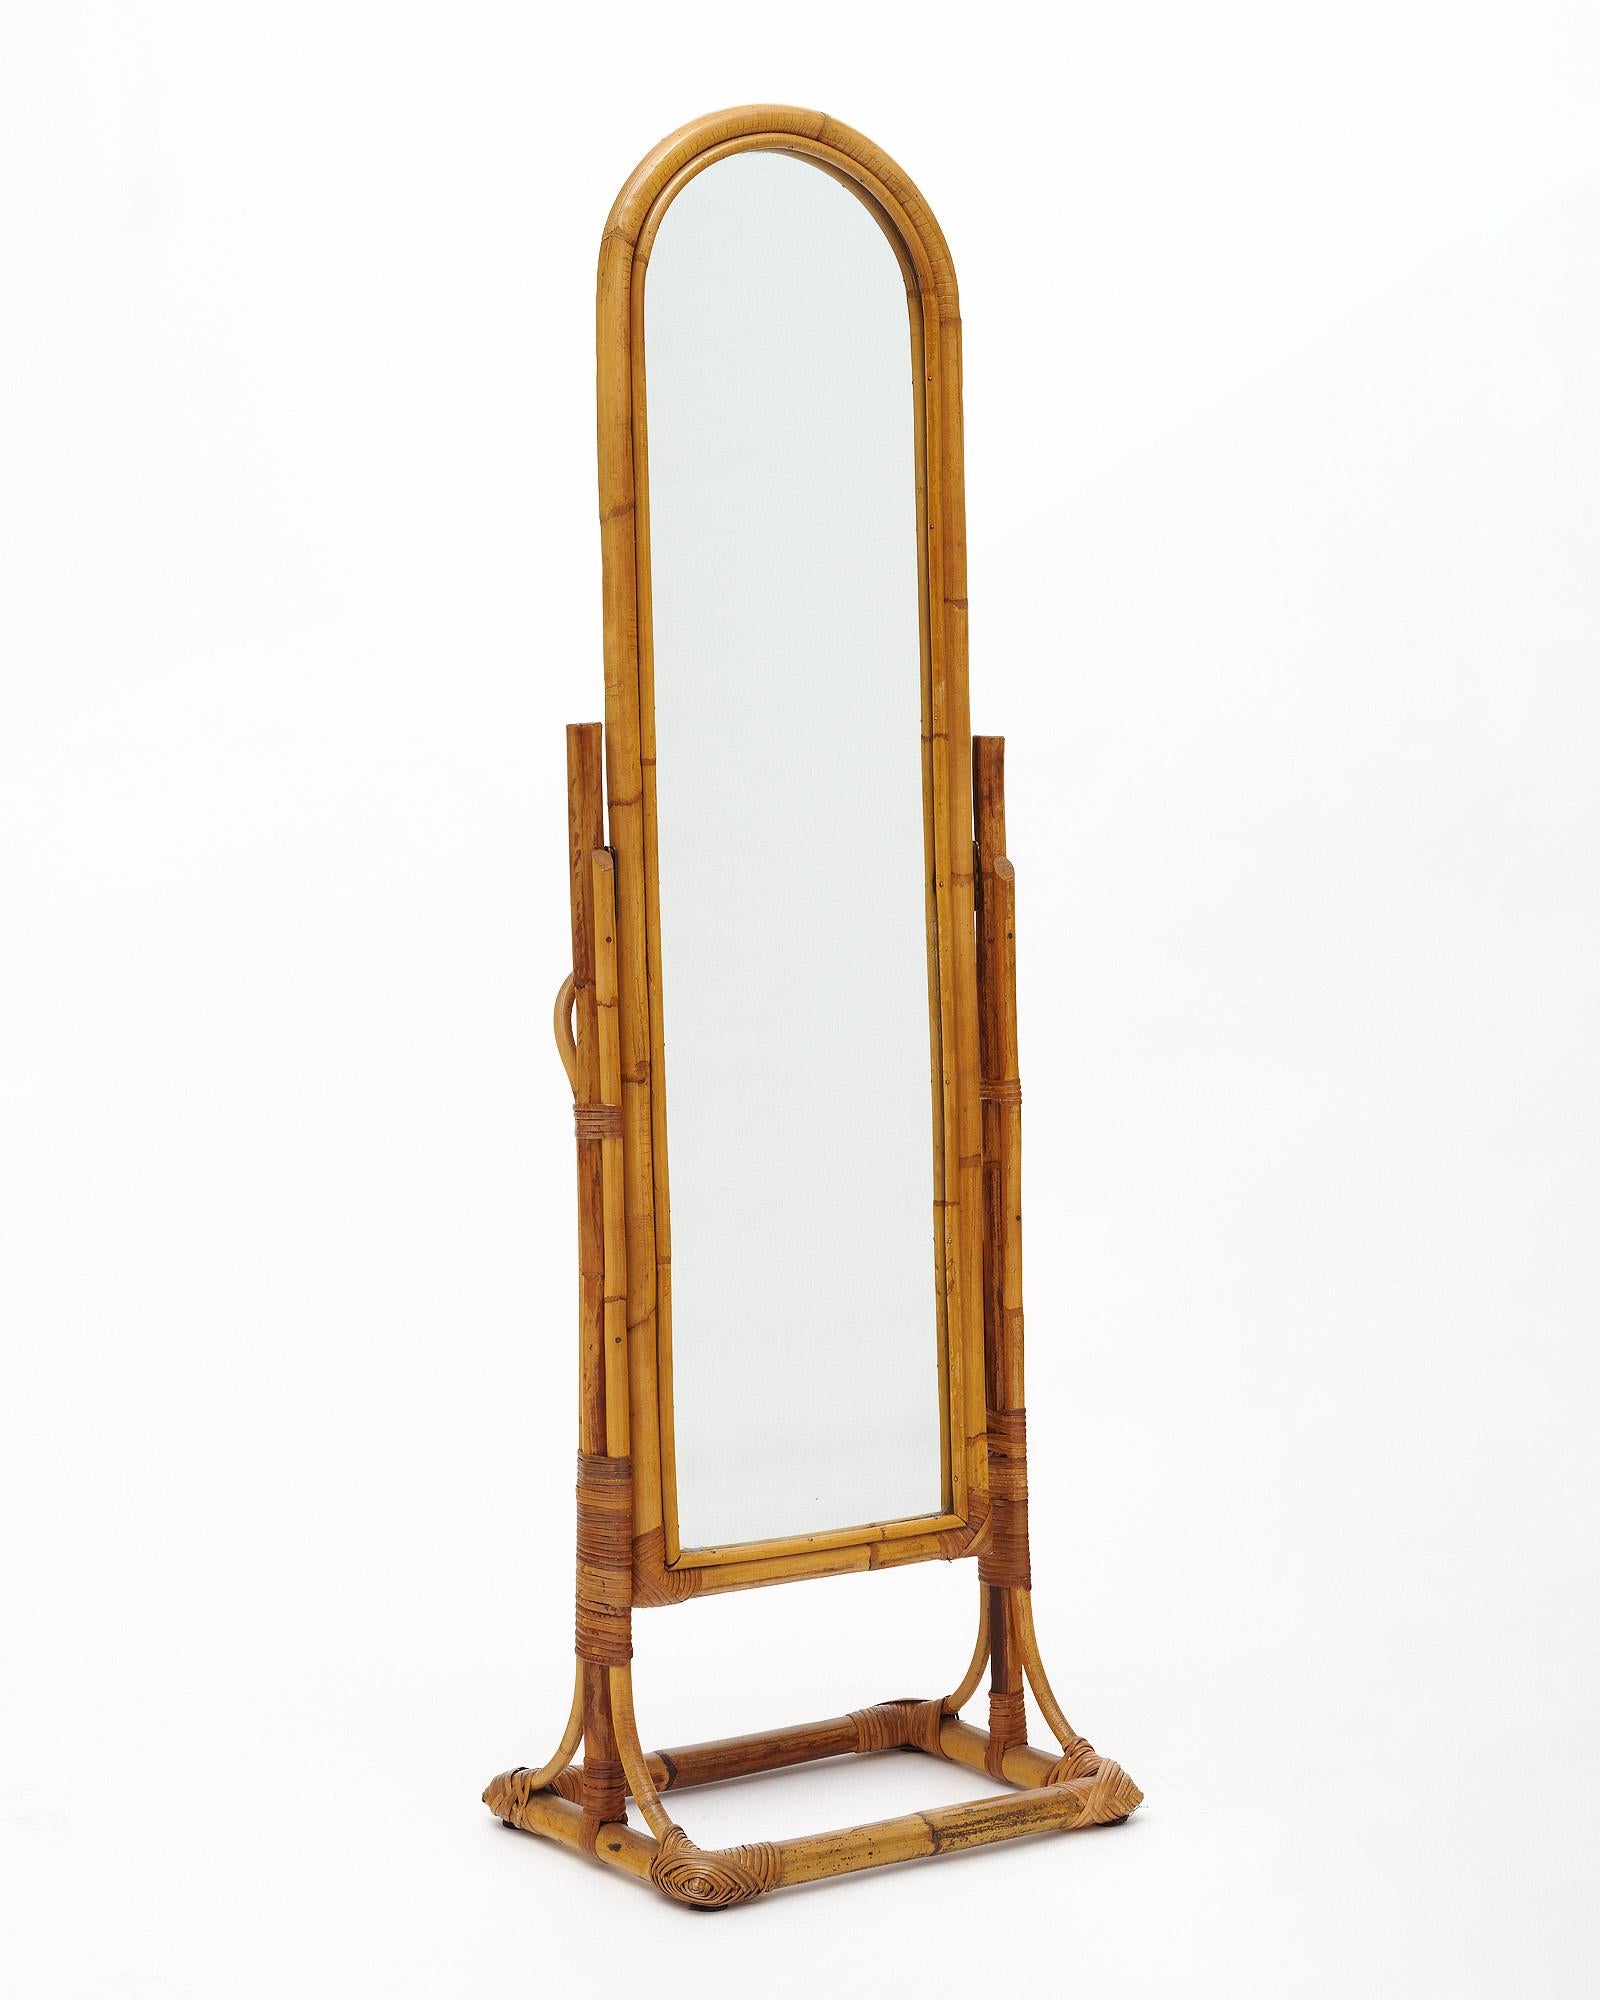 Psyche Cheval bamboo mirror from France. This charming mid-century piece features its original mirror in a frame pivoting within a bent bamboo structure on feet.
